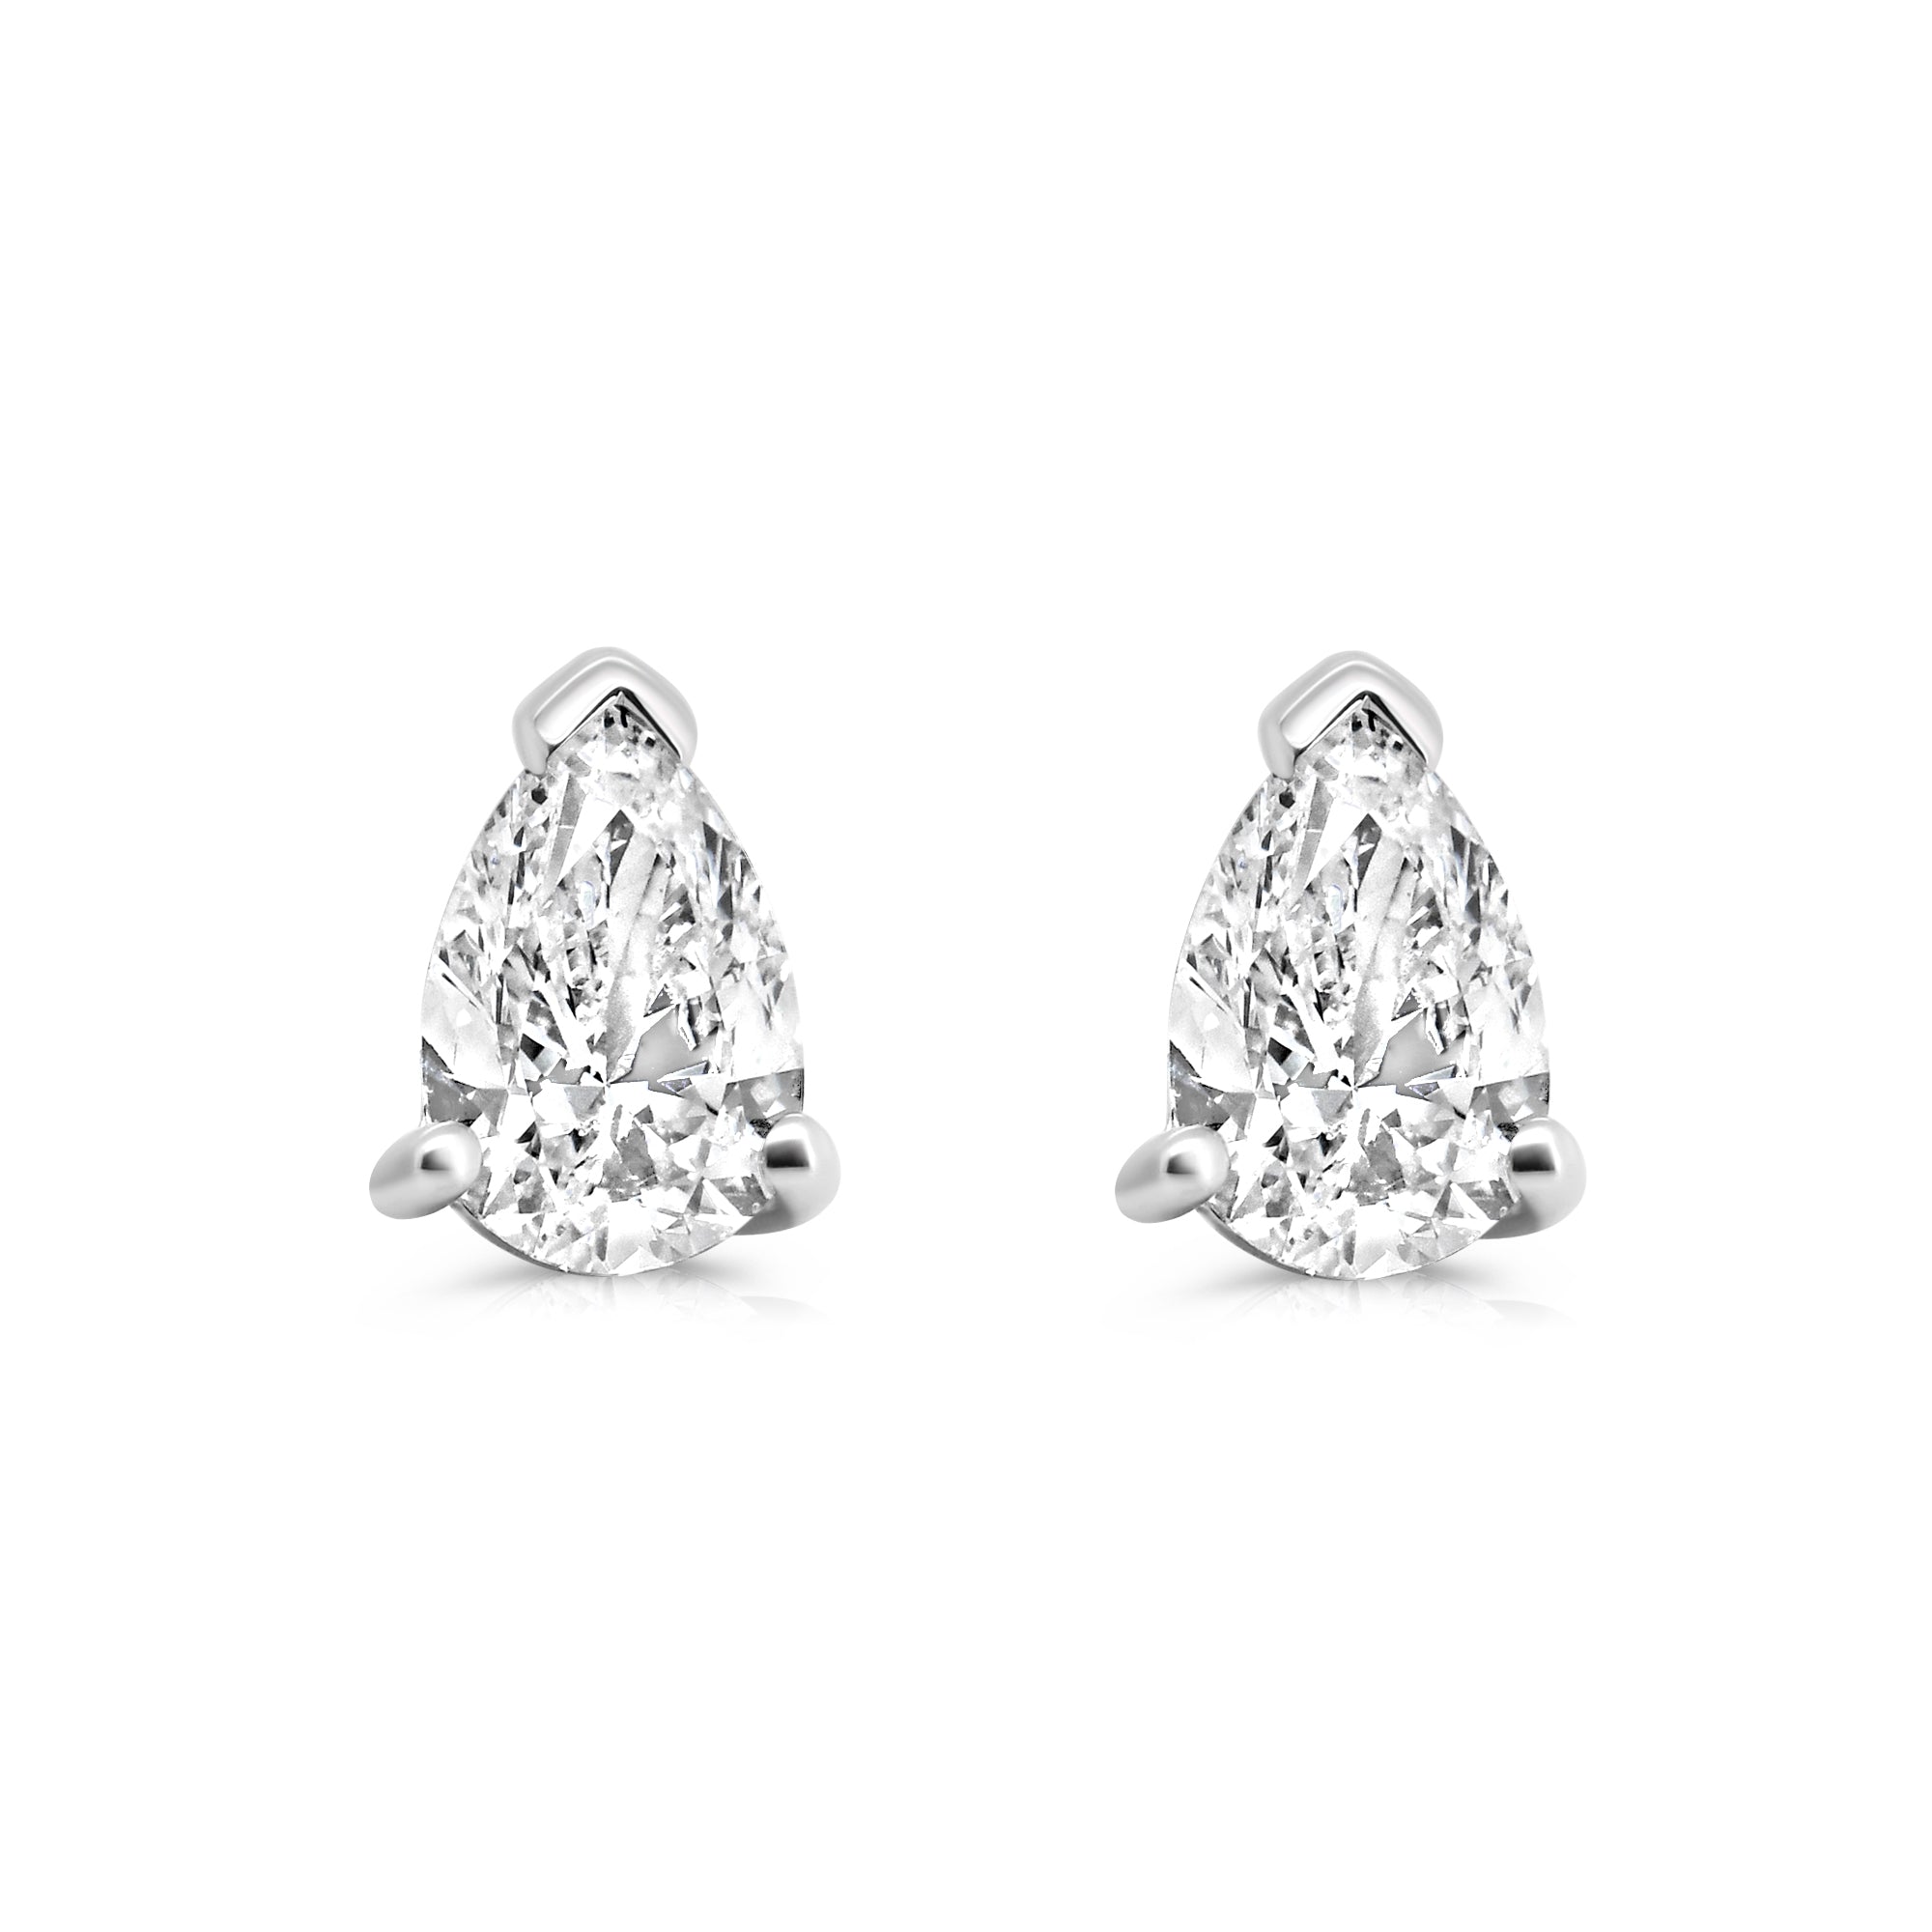 1.00ct pear shaped diamond earrings set in 18ct white gold